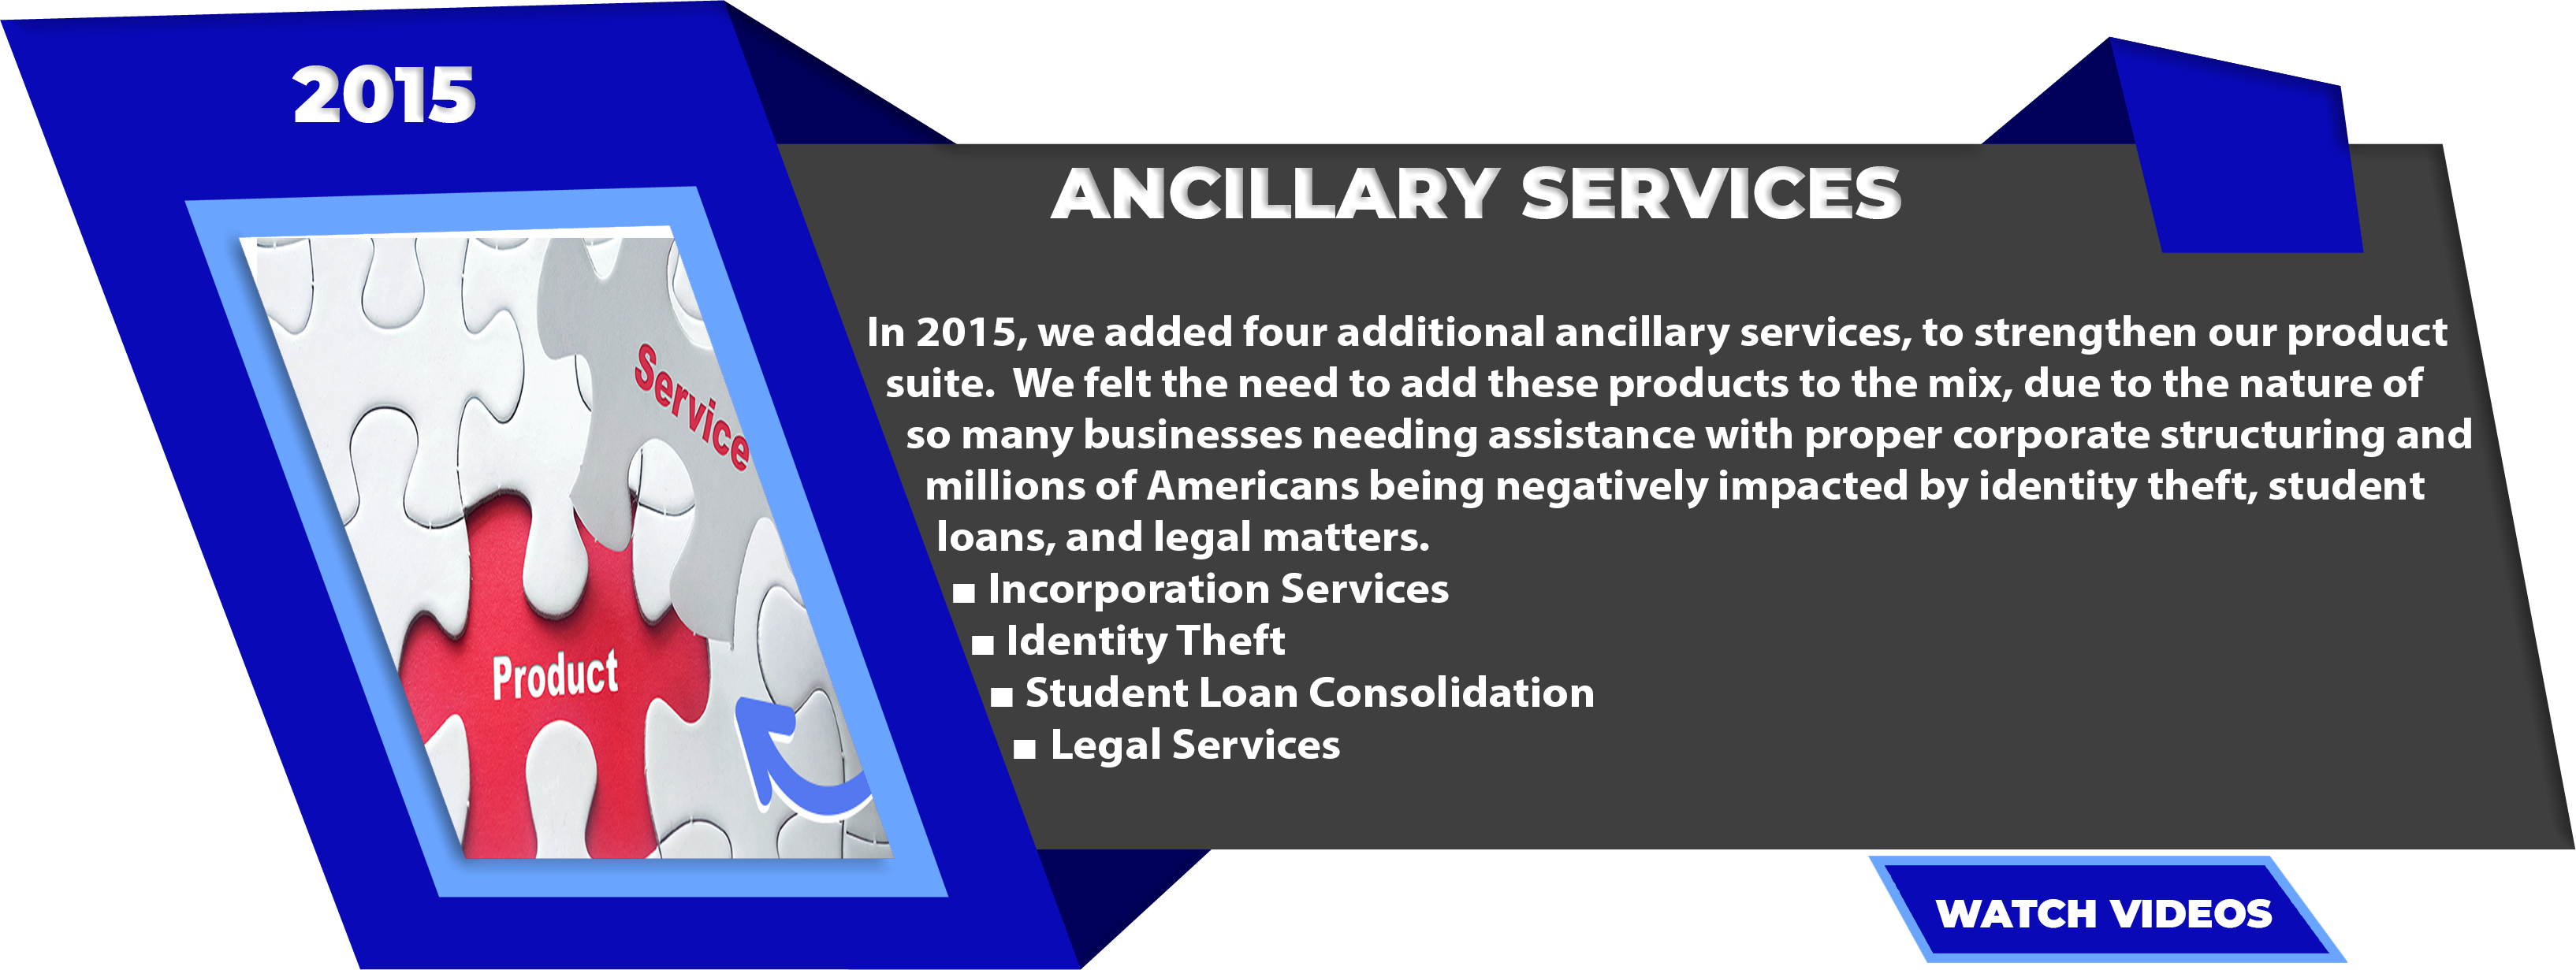 Launched Our Ancillary Services 2015